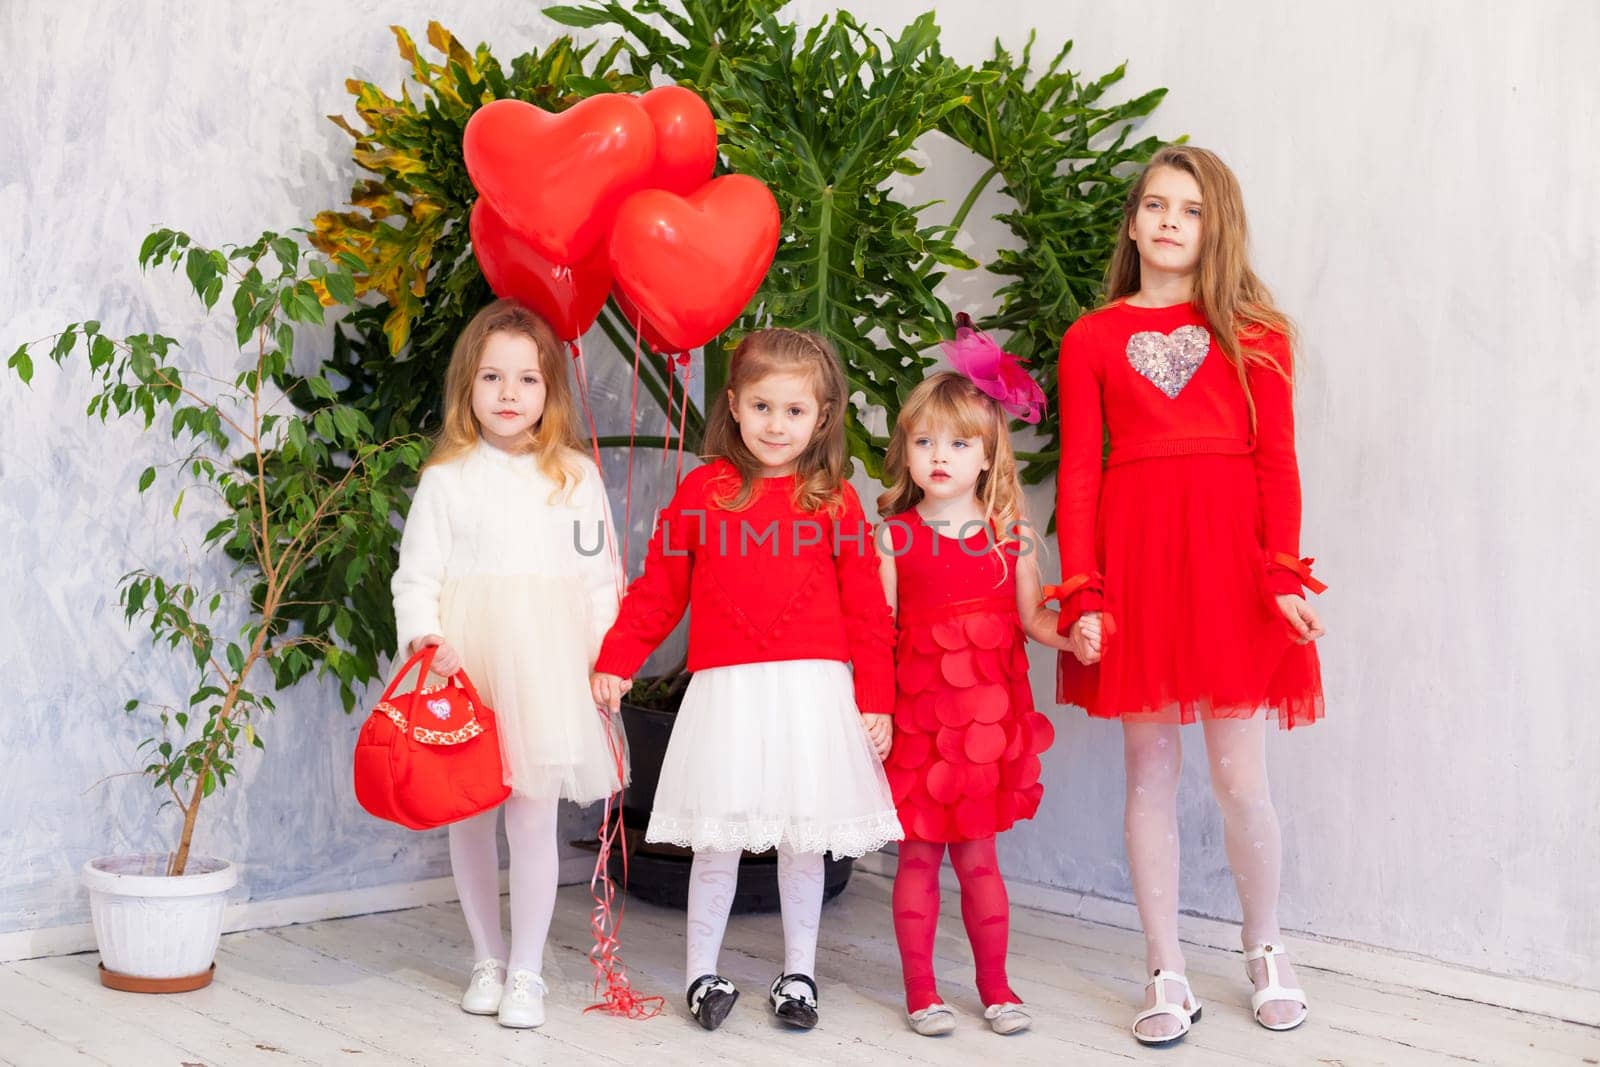 Girls with red heart-shaped balloons on birthday party by Simakov